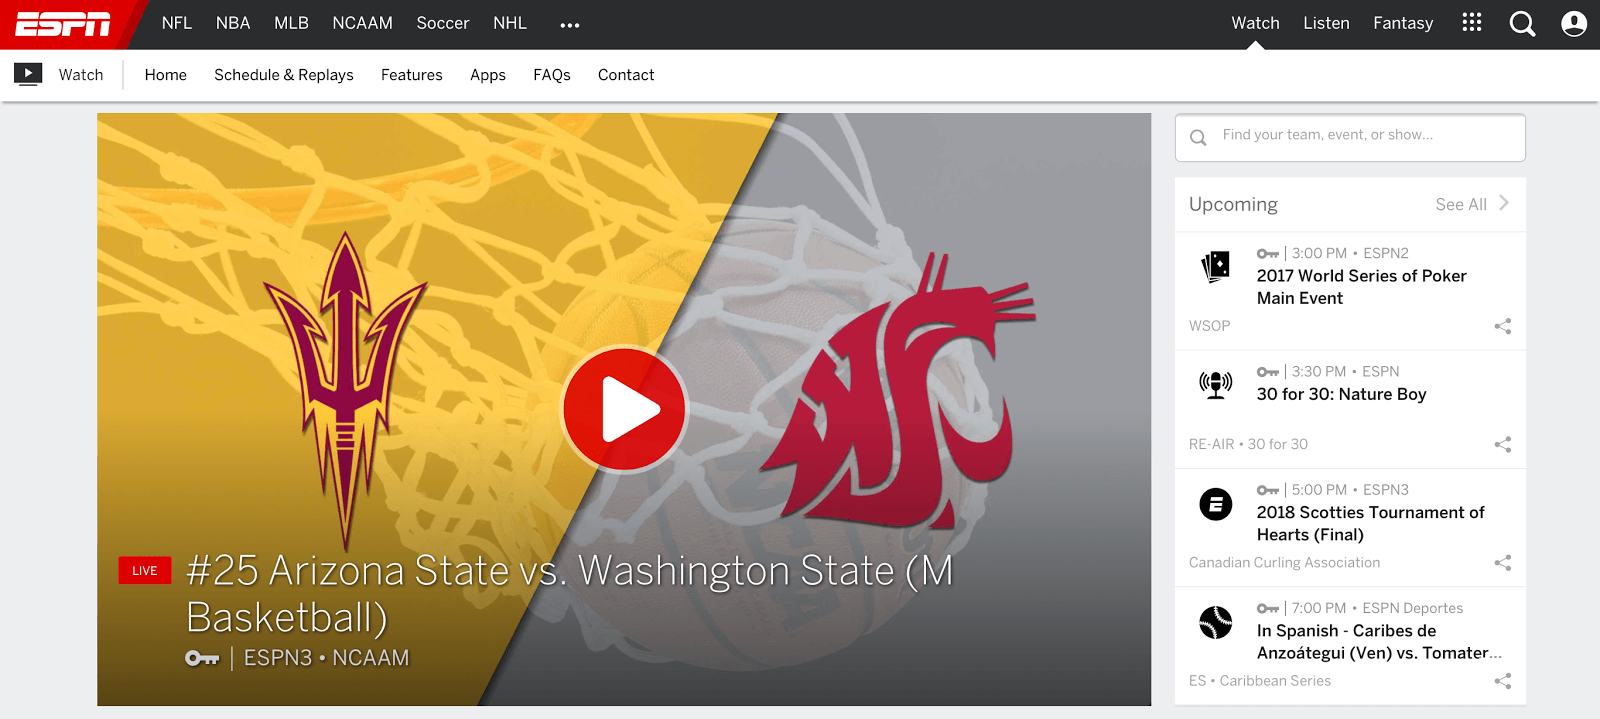 WatchESPN Logo - How to Watch ESPN3 Without Cable - Your Top 7 Options